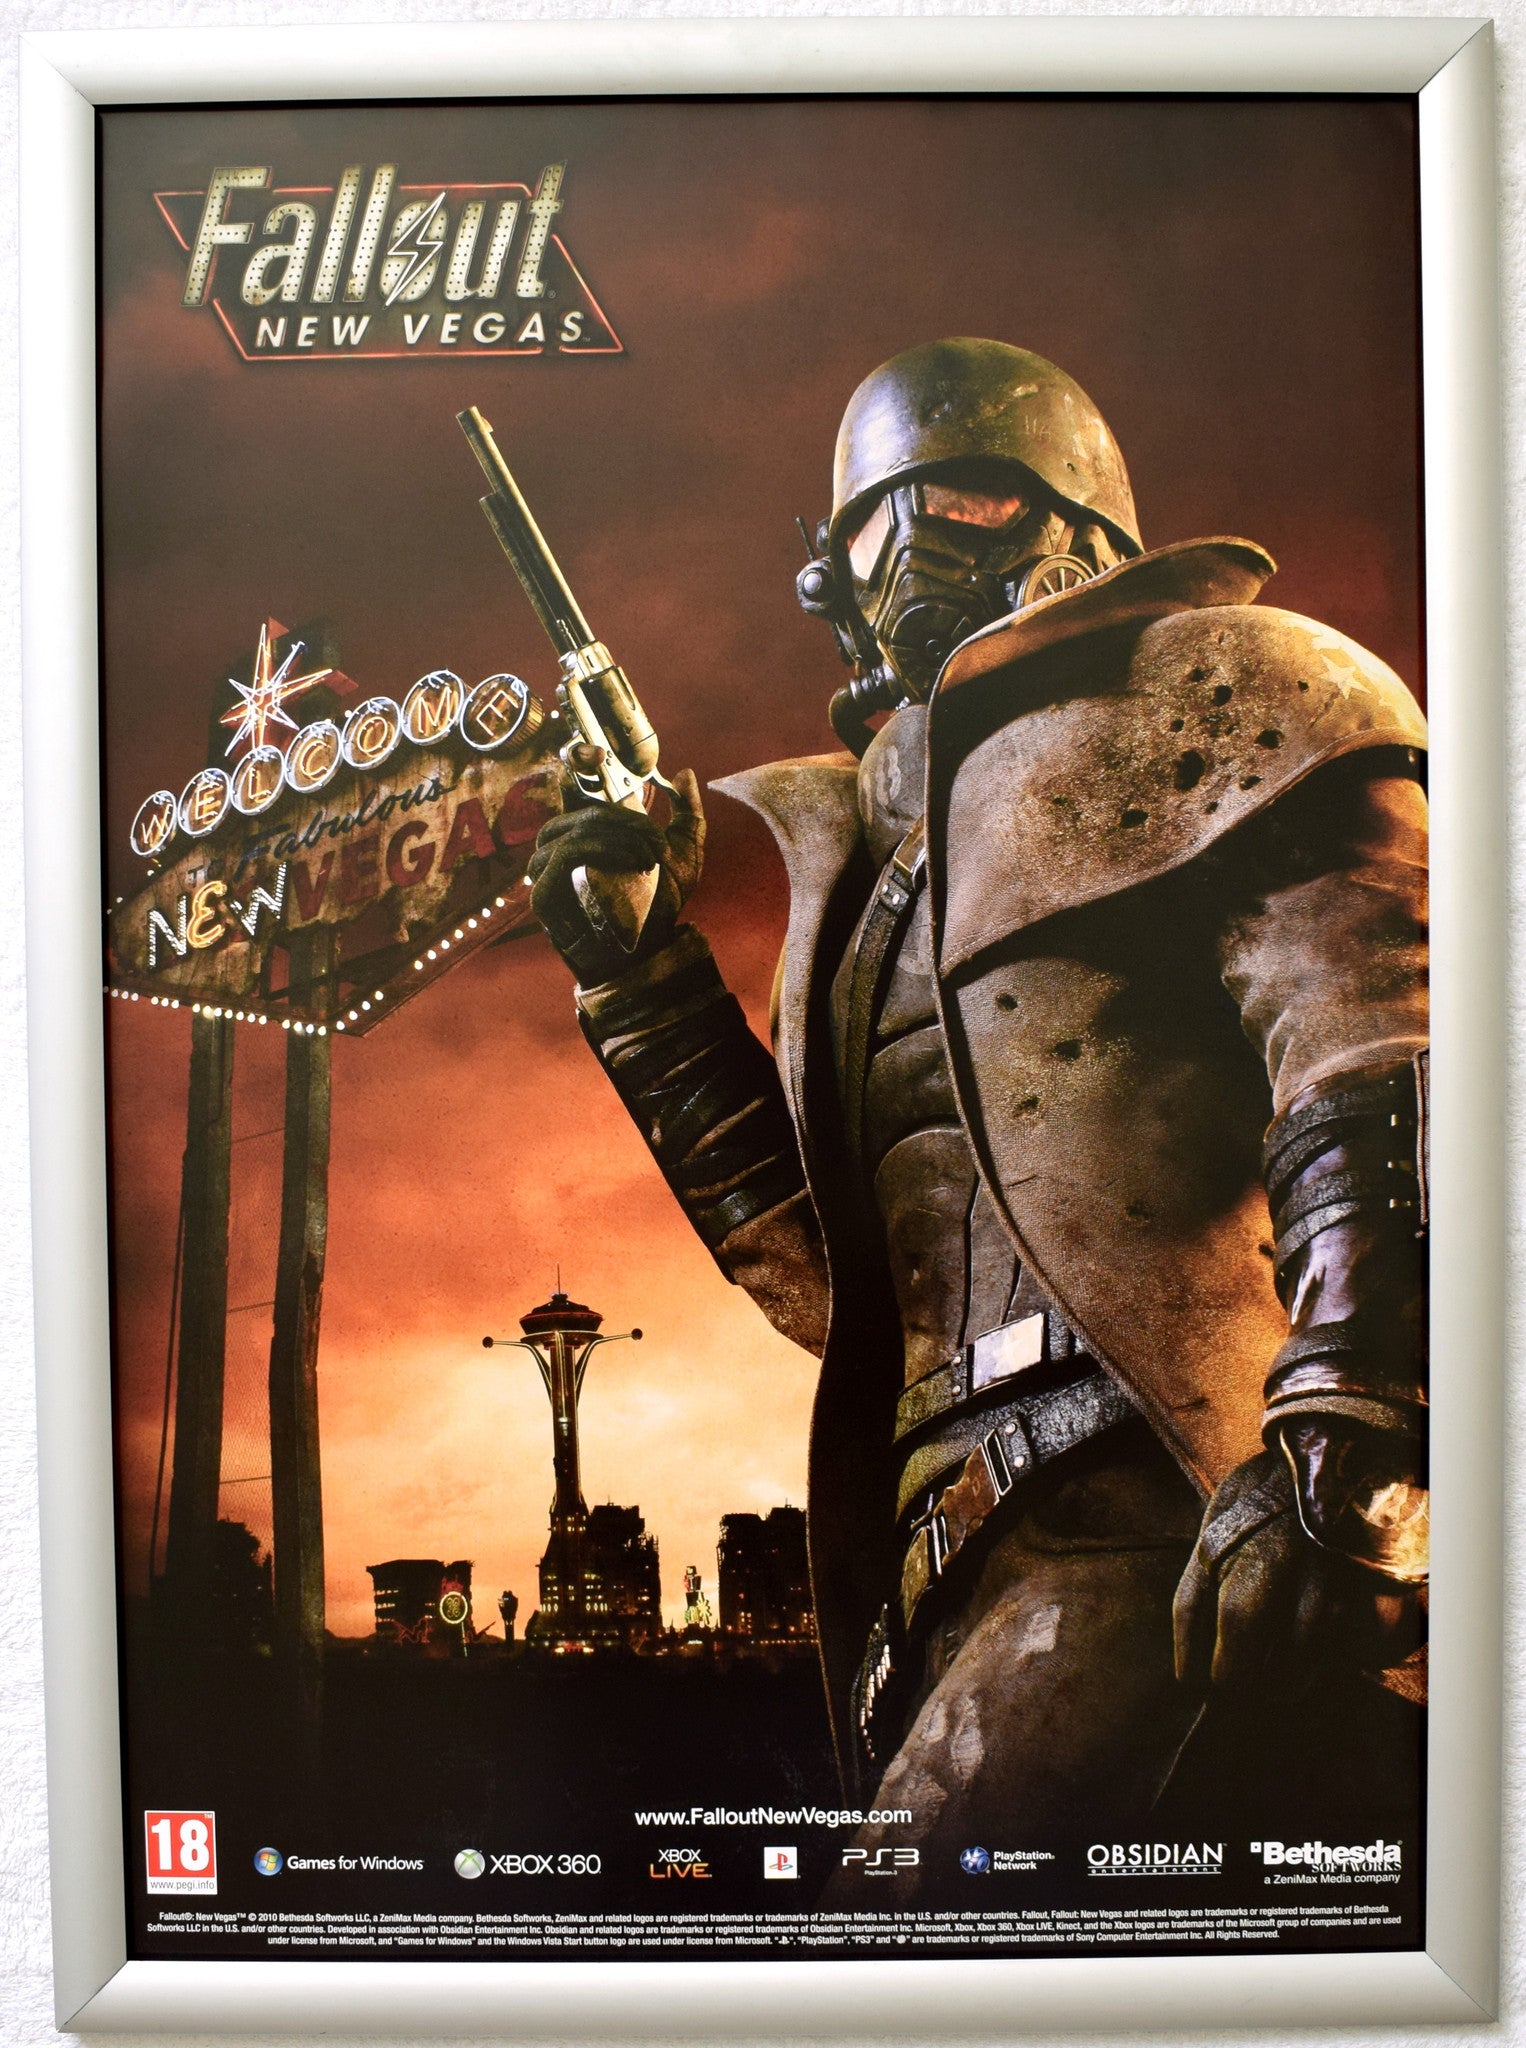 Fallout New Vegas (A2) Promotional Poster #2